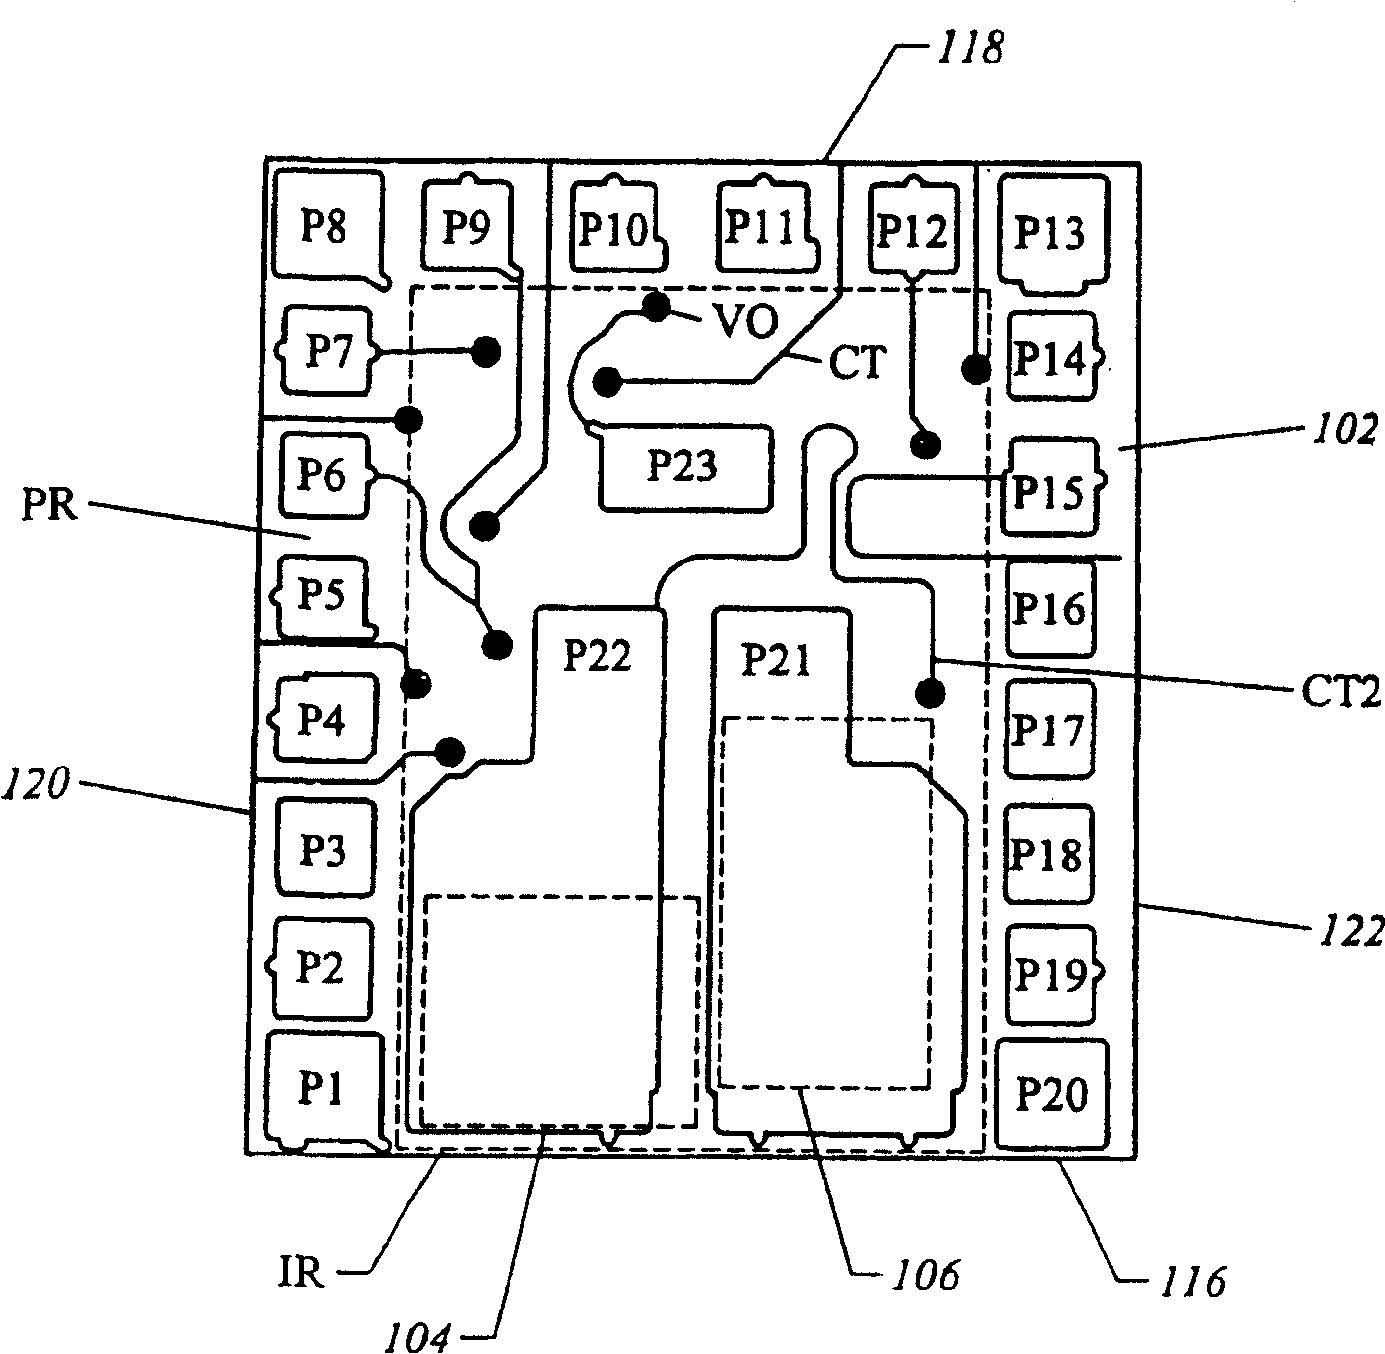 DC-DC converter implemented in a land grid array package